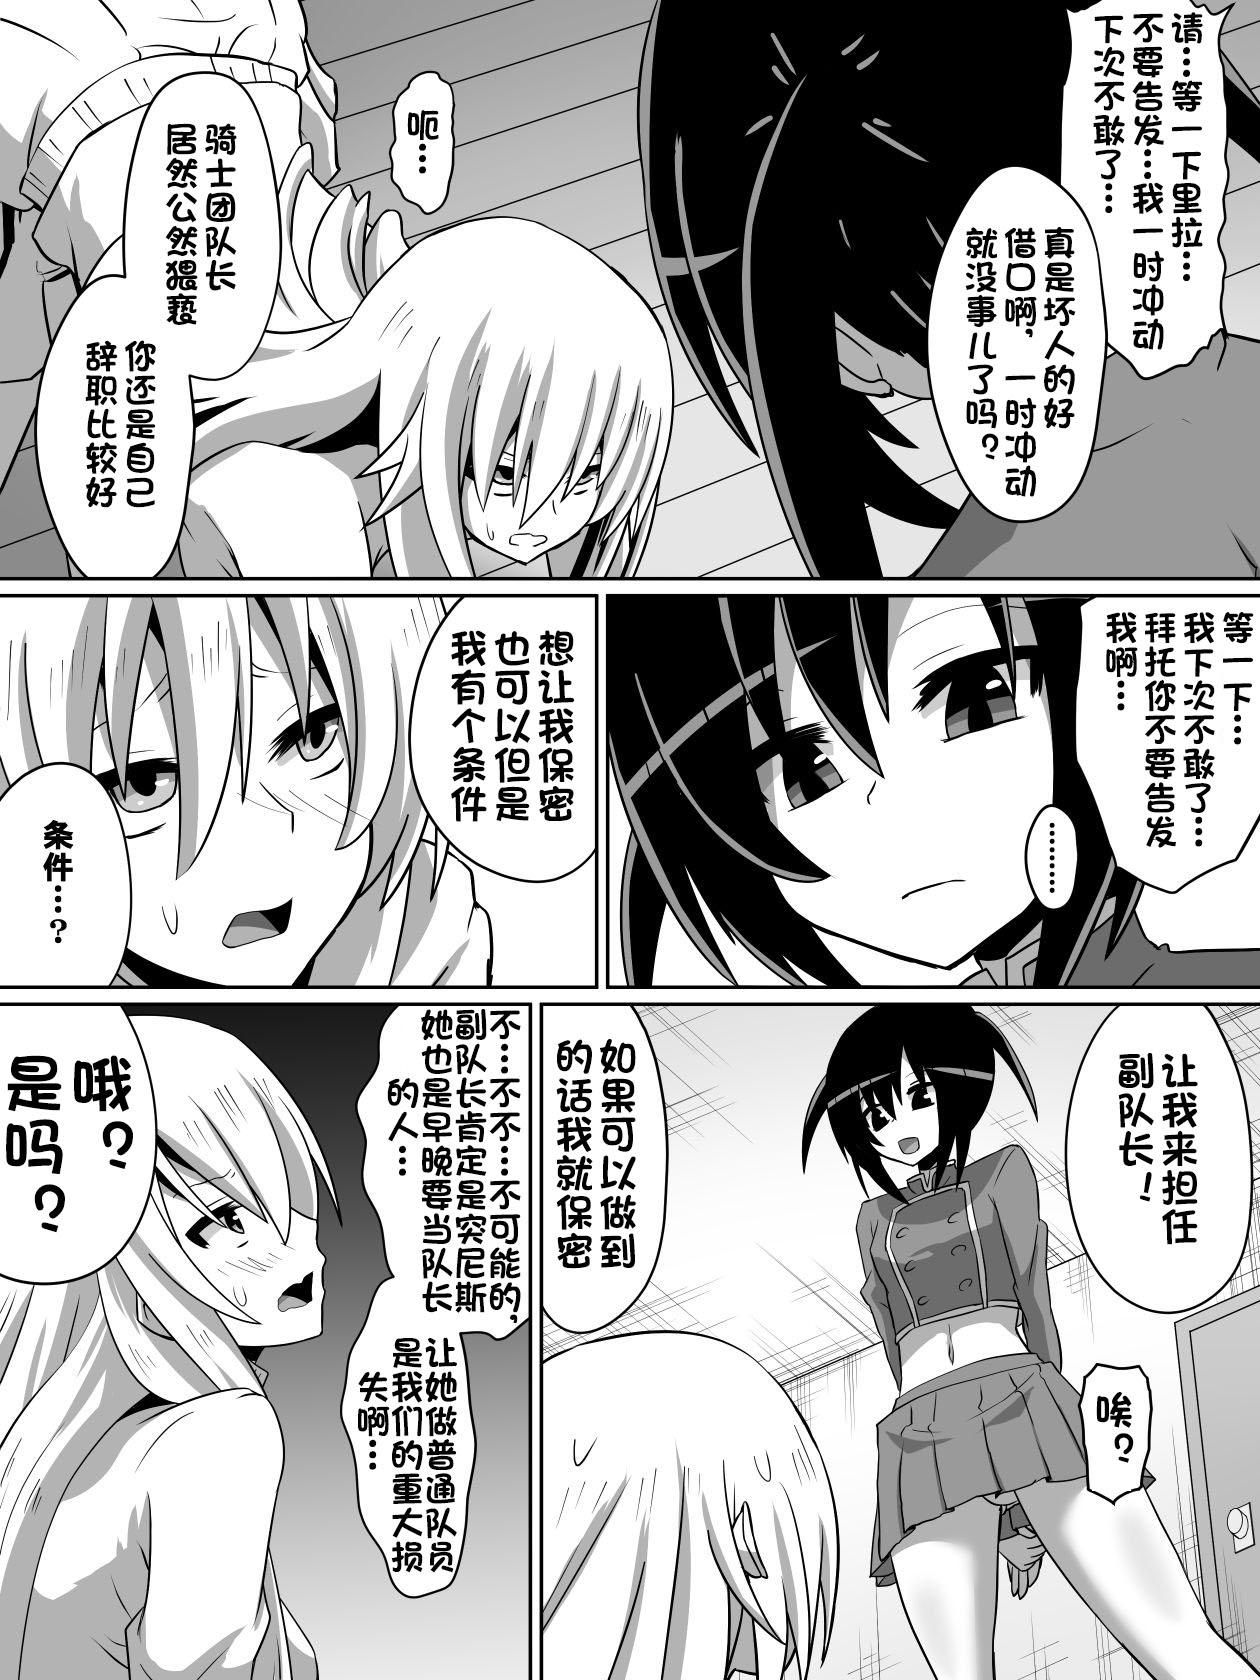 Foreplay 剣の女神ルナシス - Original Webcamchat - Page 4